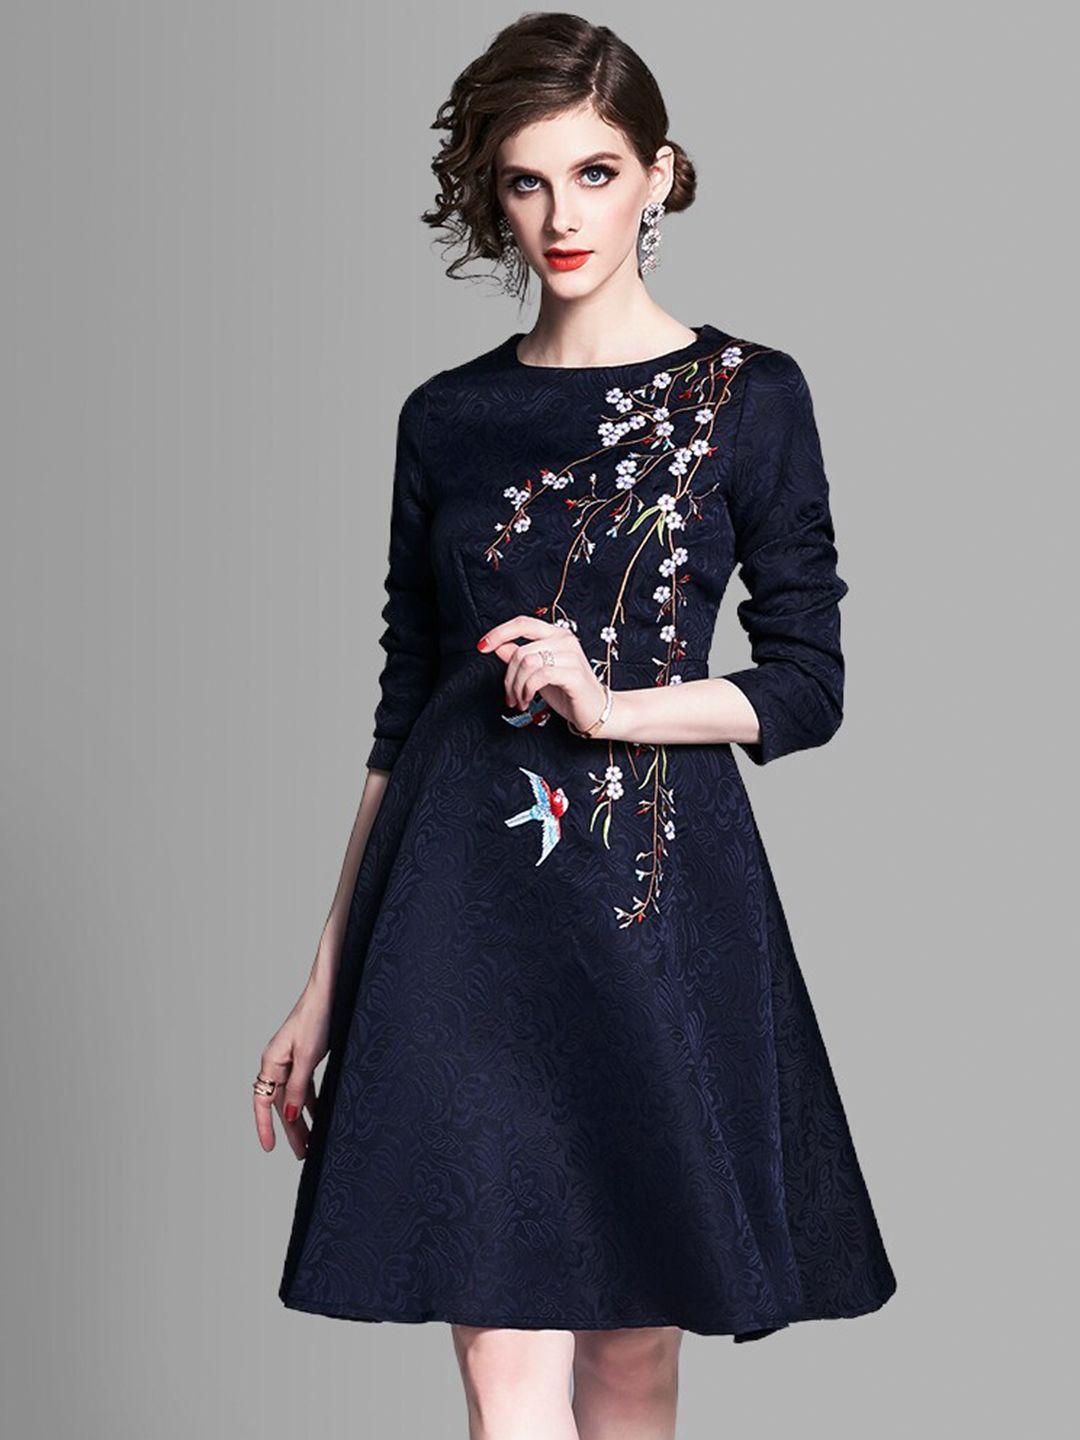 jc collection navy blue floral embroidered a-line dress